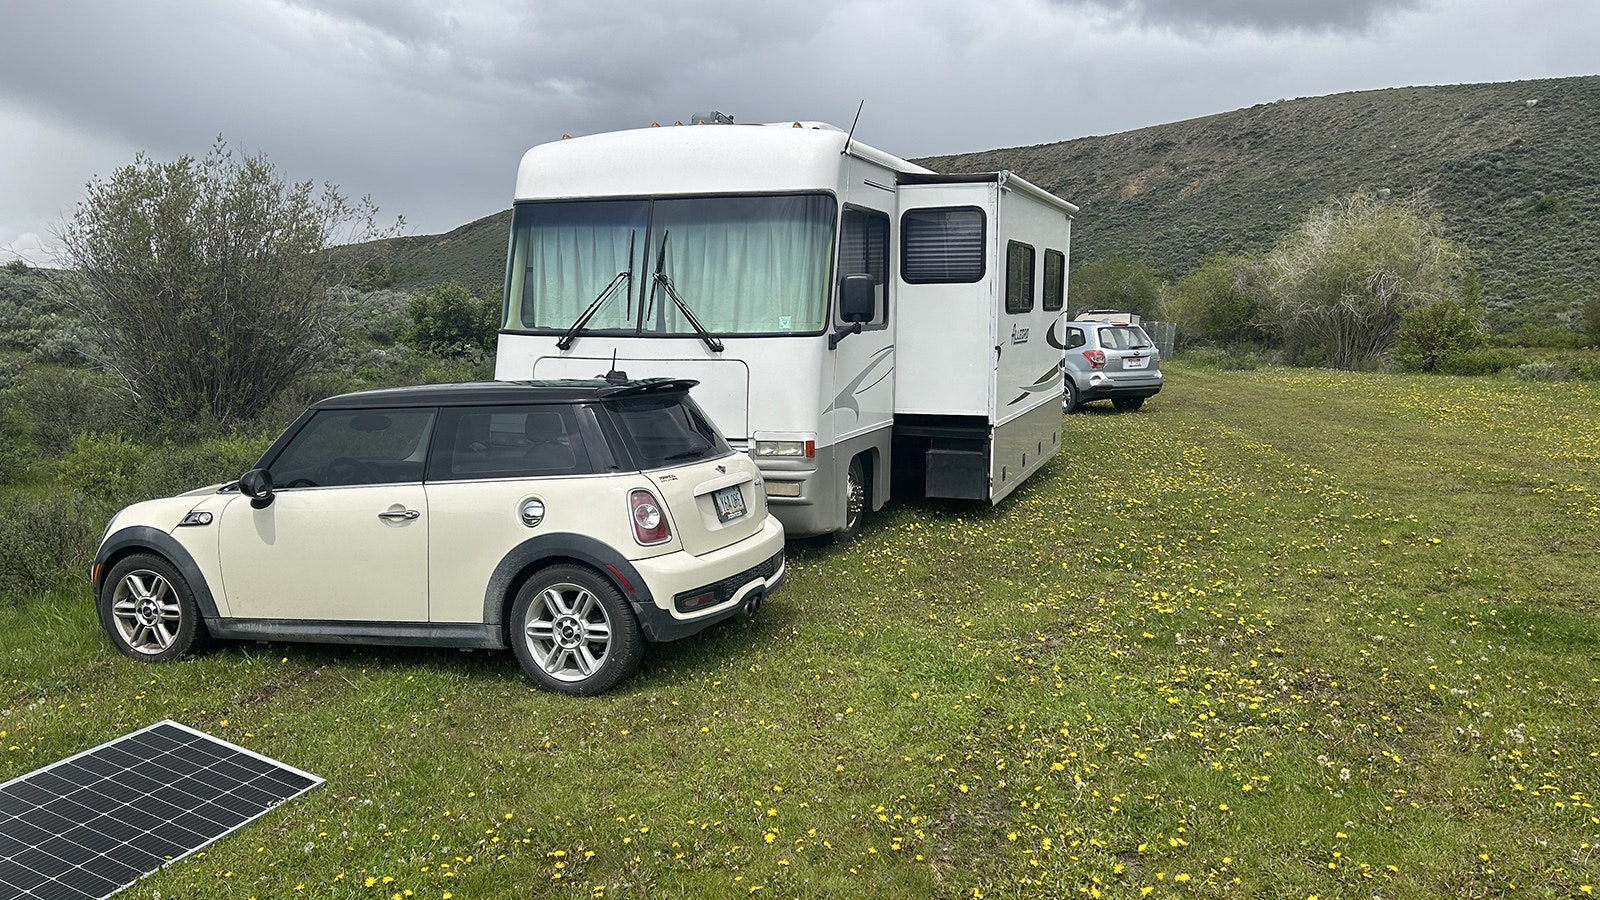 A pair of 200-watt solar panels is enough to keep John and Carmen Campa's RV lifestyle going. Here they're camped along the Green River in Sublette County, Wyoming.